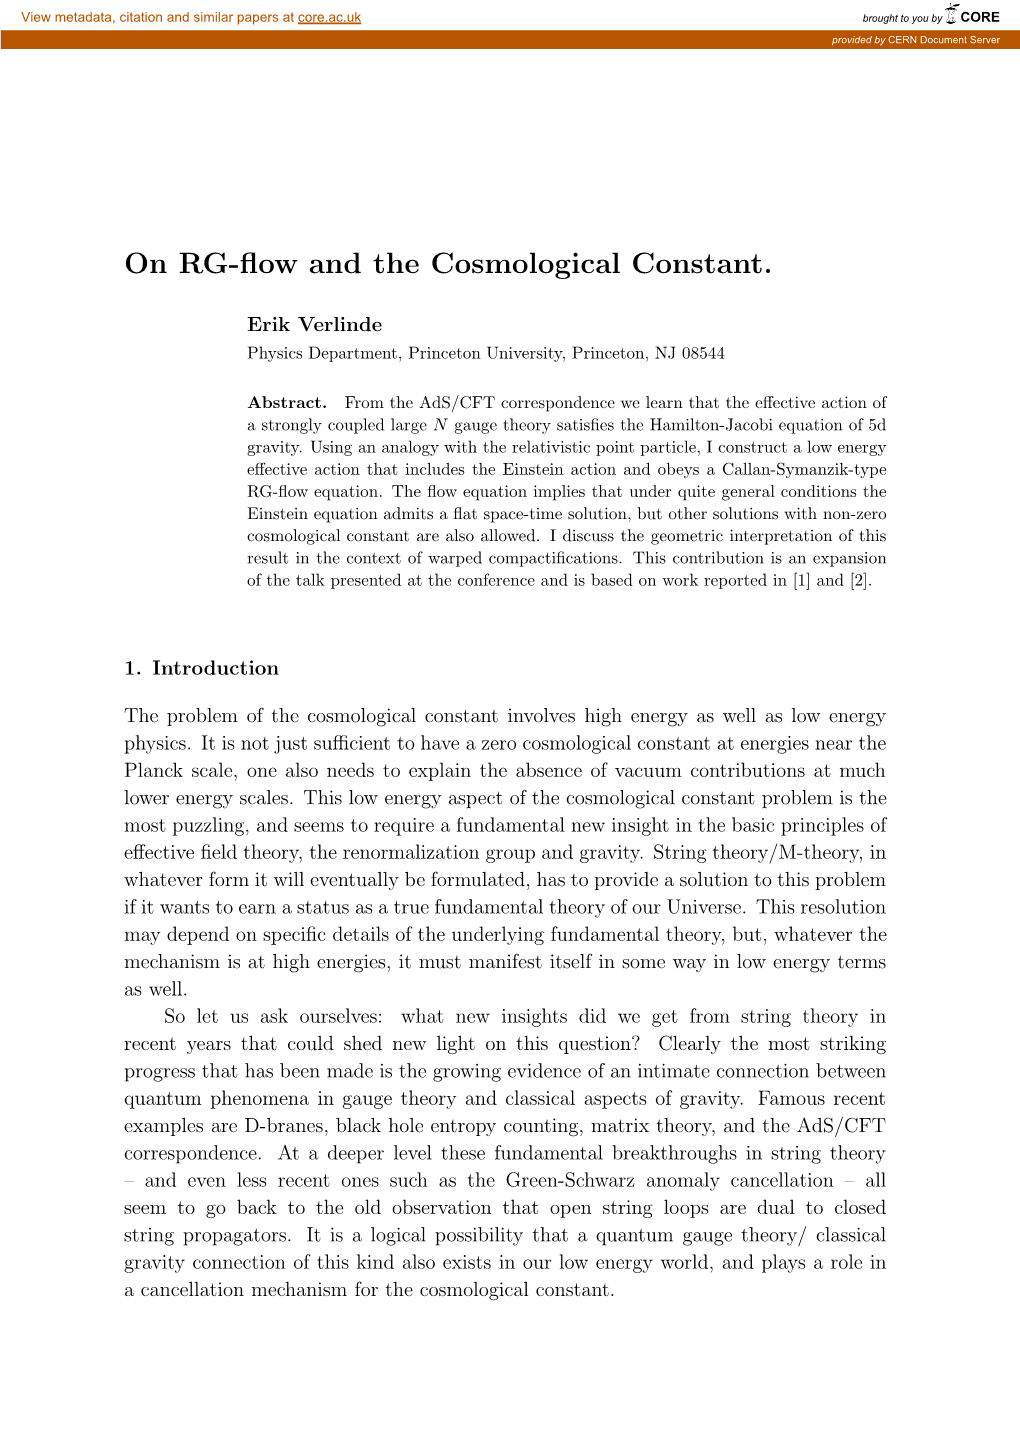 On RG-Flow and the Cosmological Constant